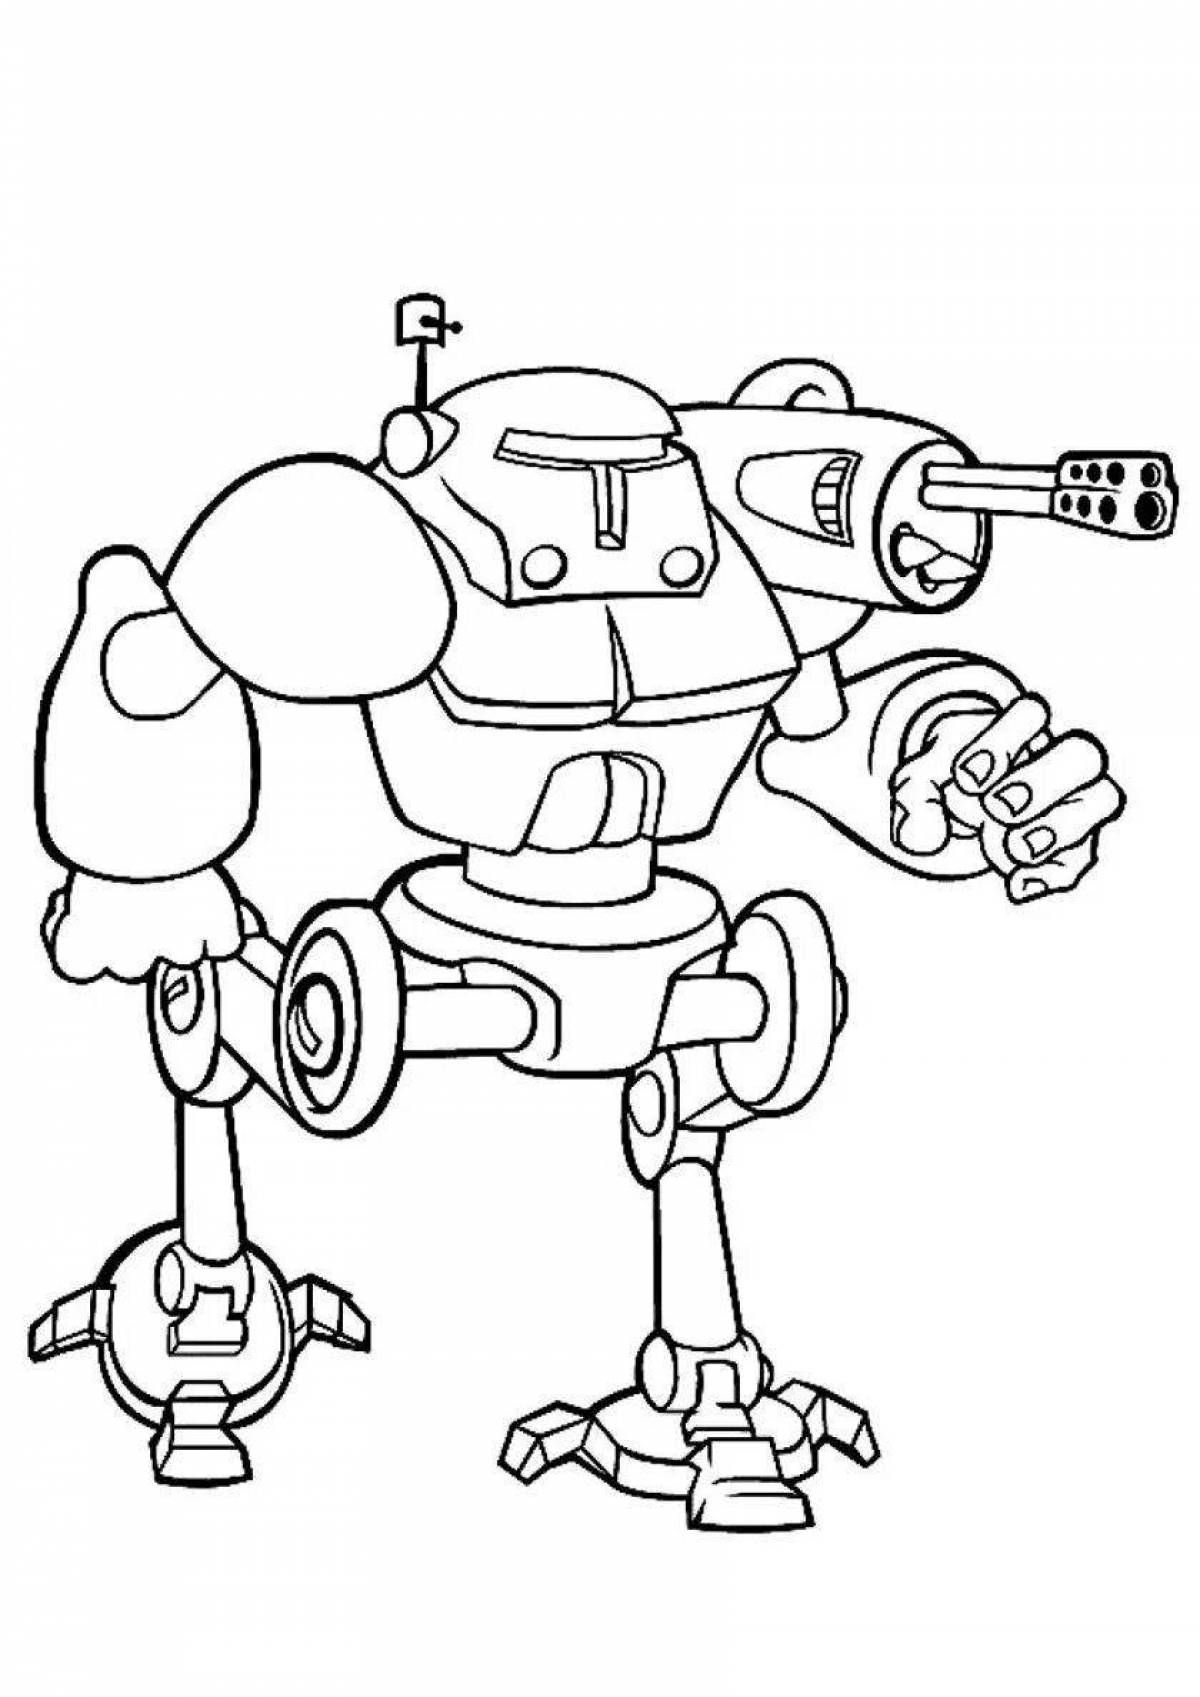 Coloring robots for kids